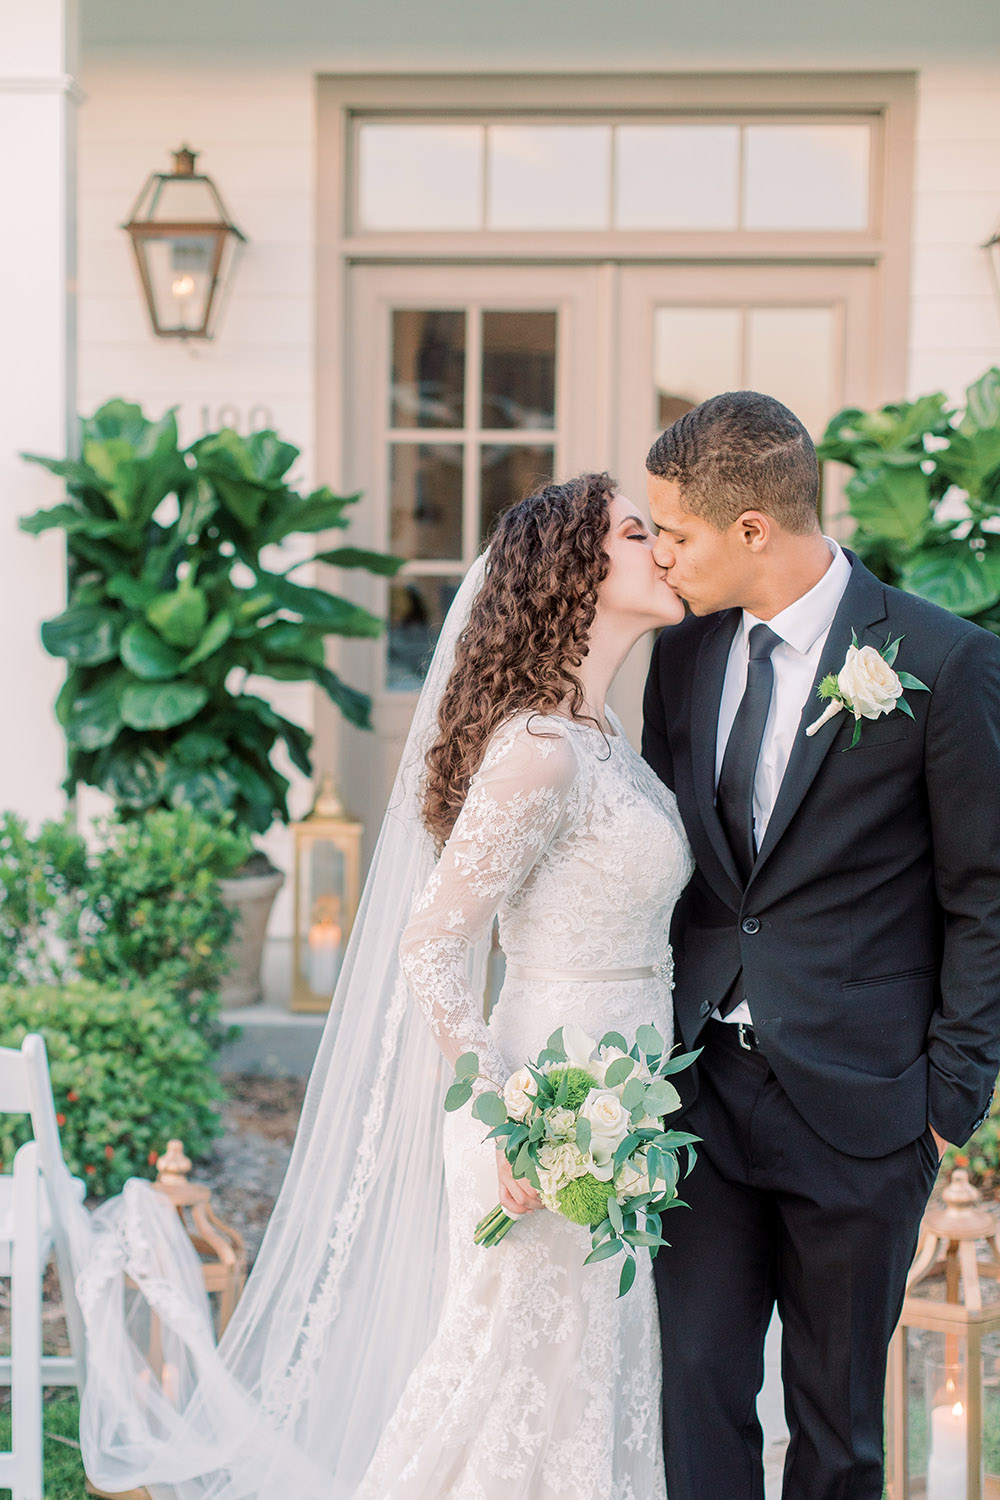 A bride and groom kiss during a front porch wedding ceremony. Photo: Ashley Kristen Photography